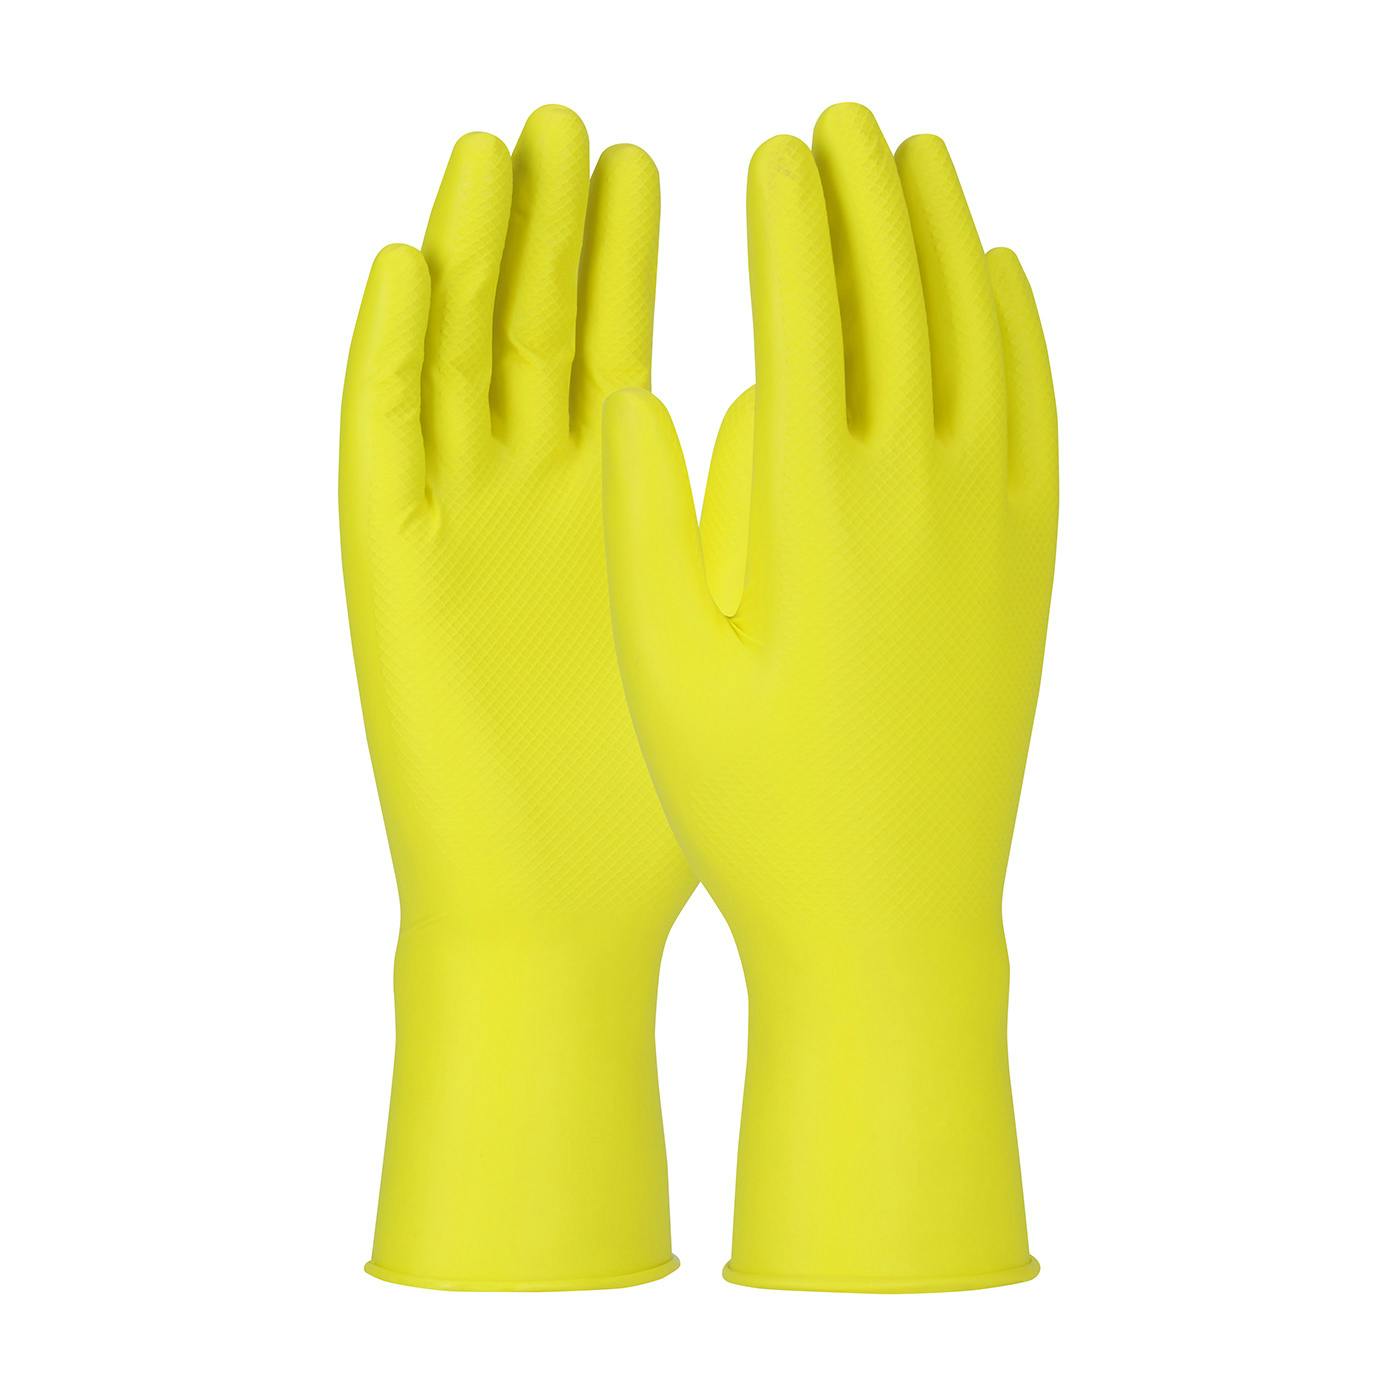 Grippaz™ Jan San Extended Use Ambidextrous Nitrile Glove with Textured Fish Scale Grip - 6 Mil (67-306)_0